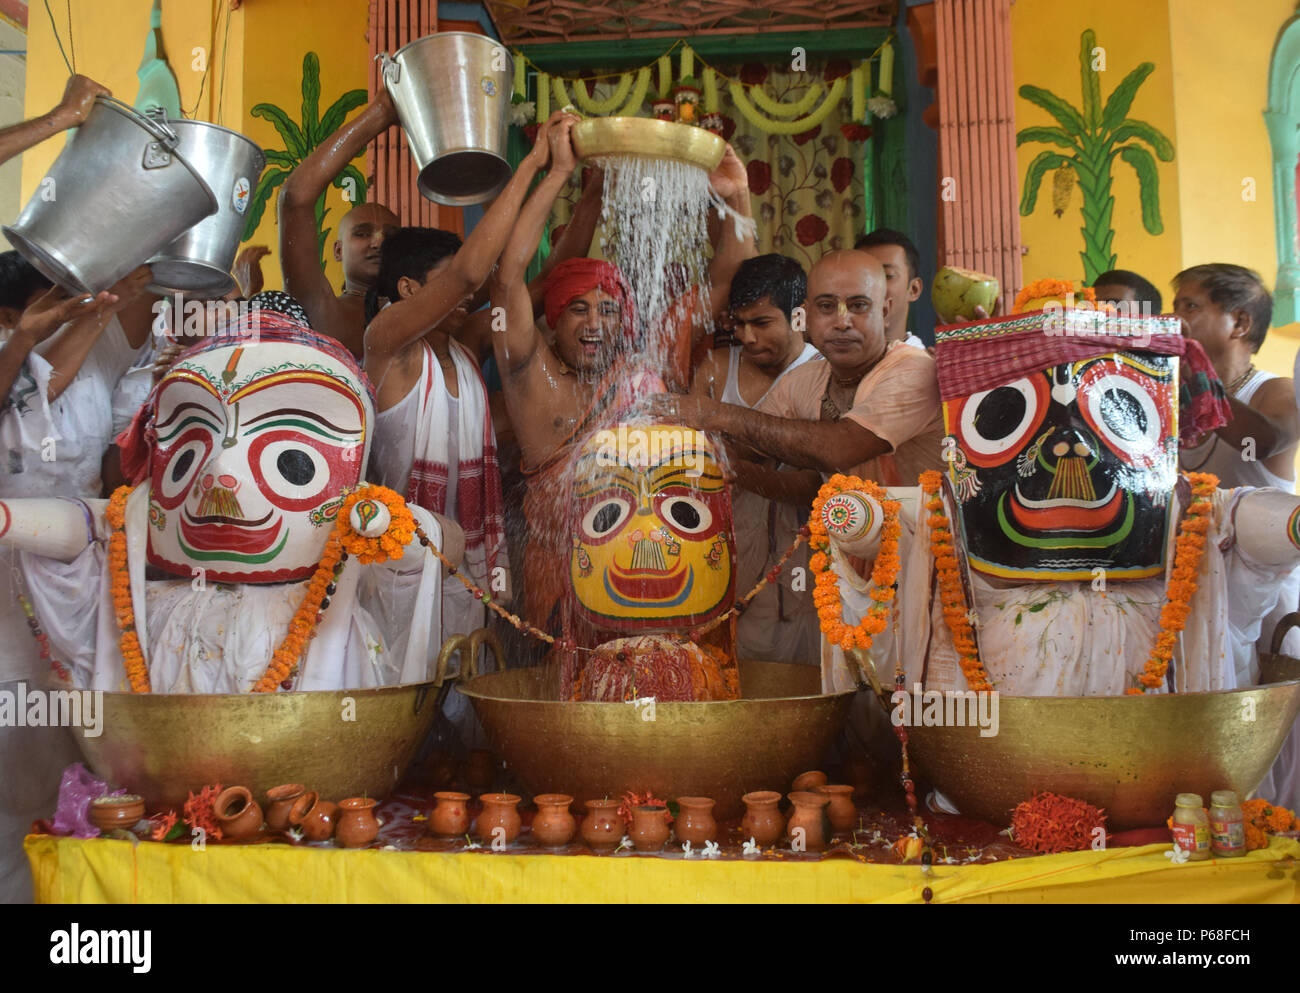 Tripura, Indian state of Tripura. 28th June, 2018. Hindu priests pour milk atop of deities Lord Jagannath, Balabhadra and Subhadra during the bathing ceremony in Agartala, capital of the northeastern Indian state of Tripura, on June 28, 2018. Credit: Stringer/Xinhua/Alamy Live News Stock Photo